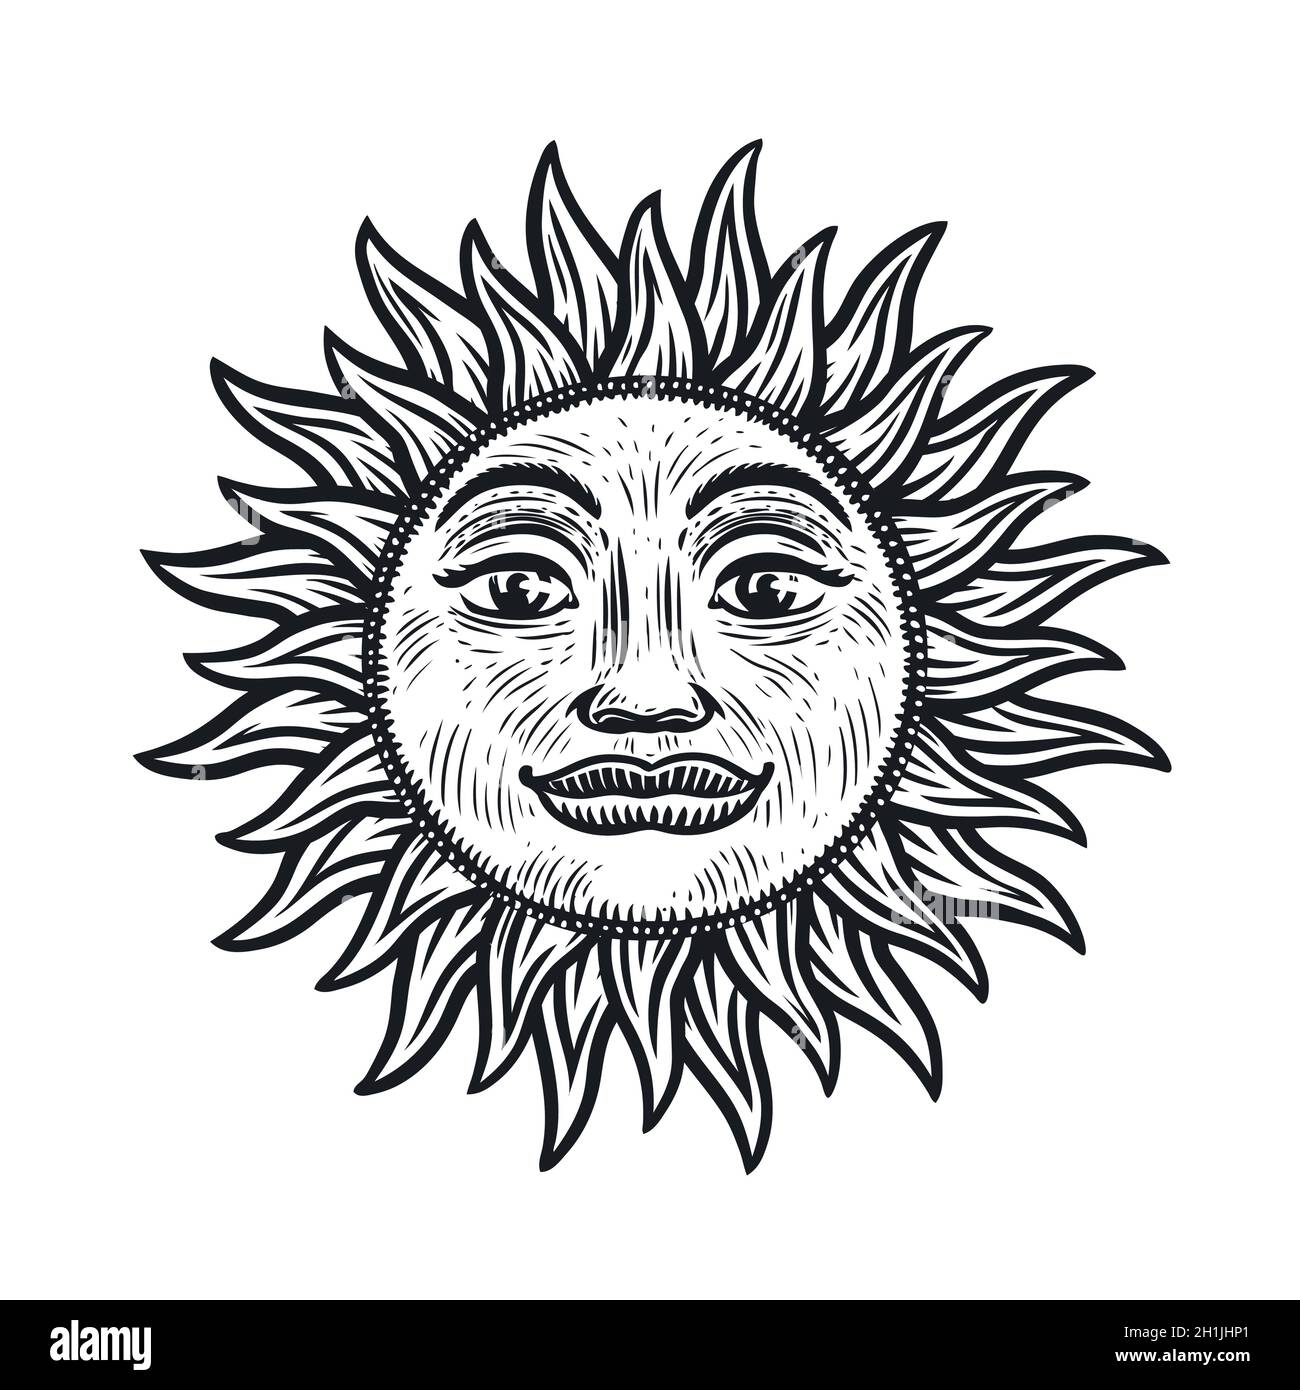 Sun with rays in vintage engraving style. Hand drawn sketch vector illustration Stock Vector